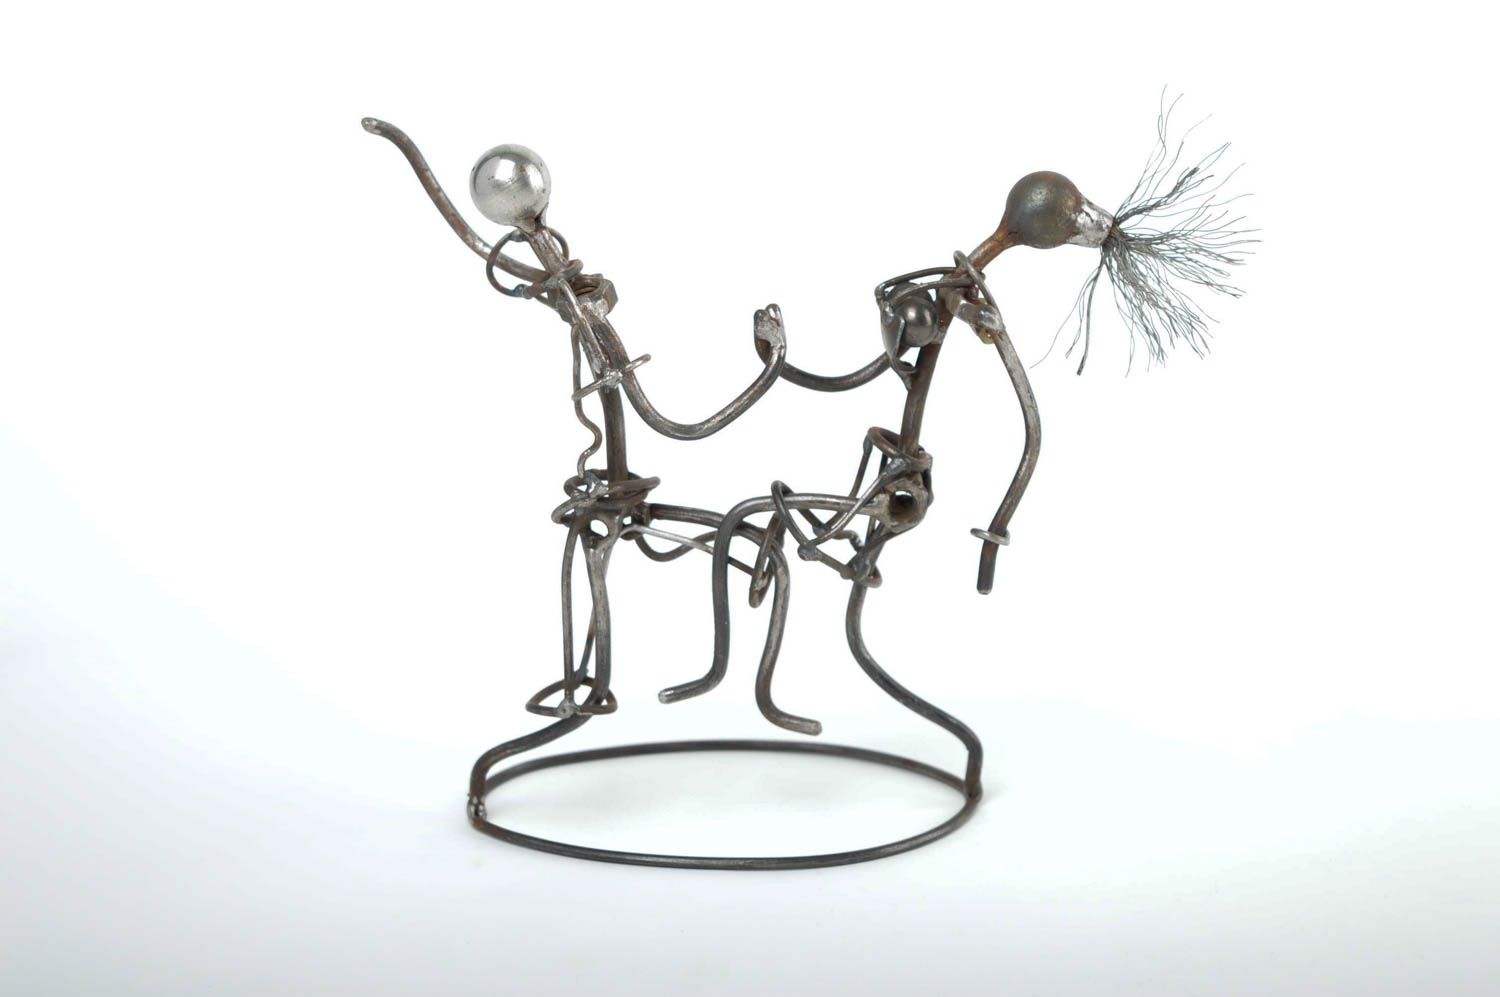 Unusual handmade metal figurine interior decorating gift ideas for decor only photo 2